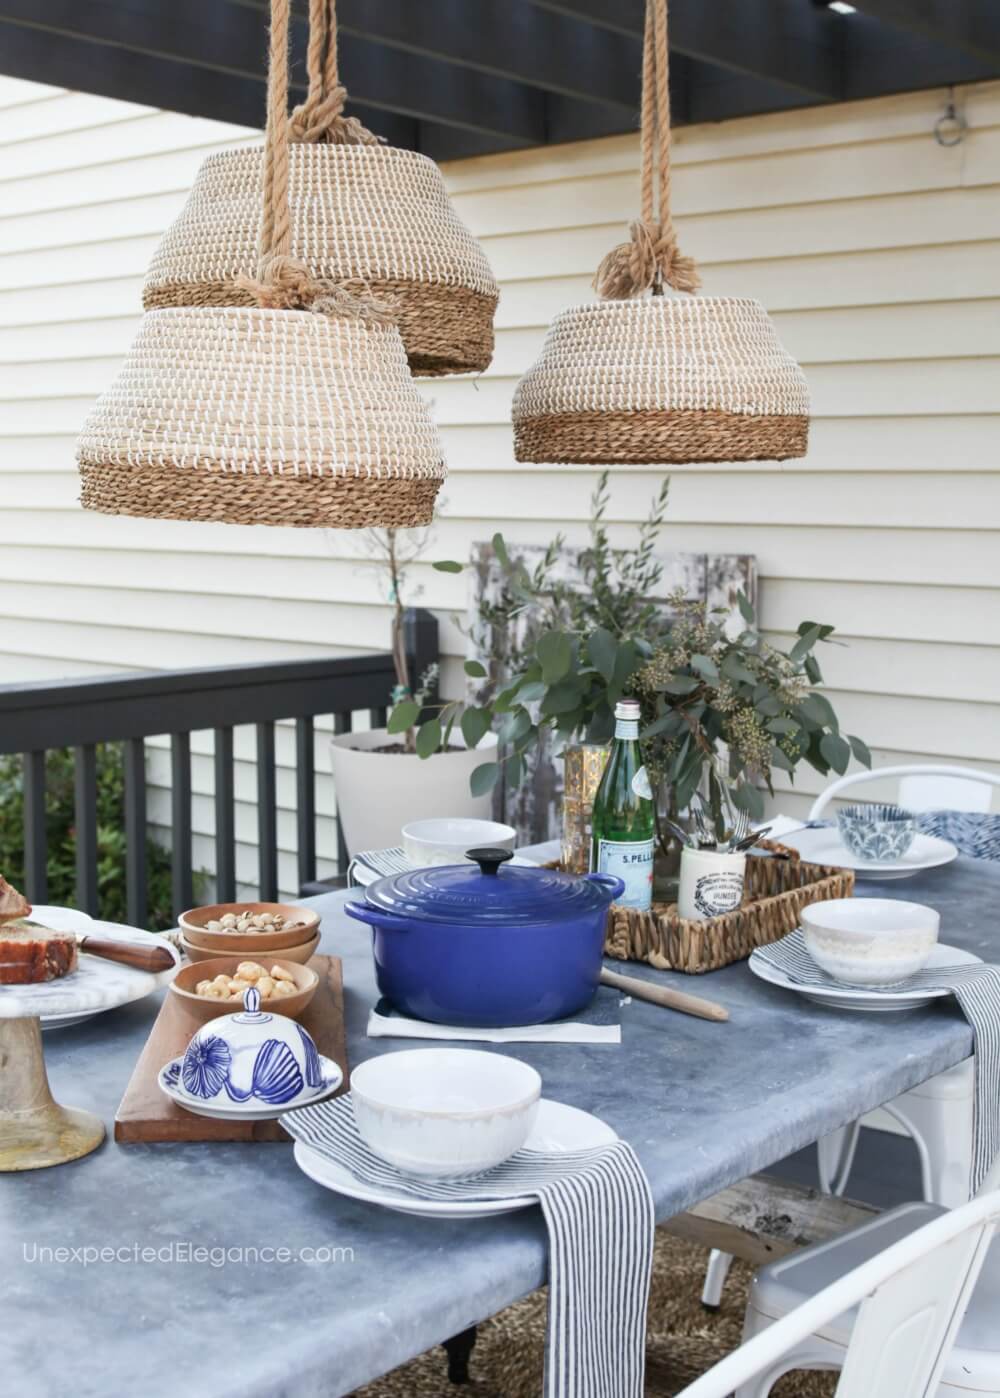 15 Awesome DIY Outdoor Light Ideas You Will Definitely Want To Craft